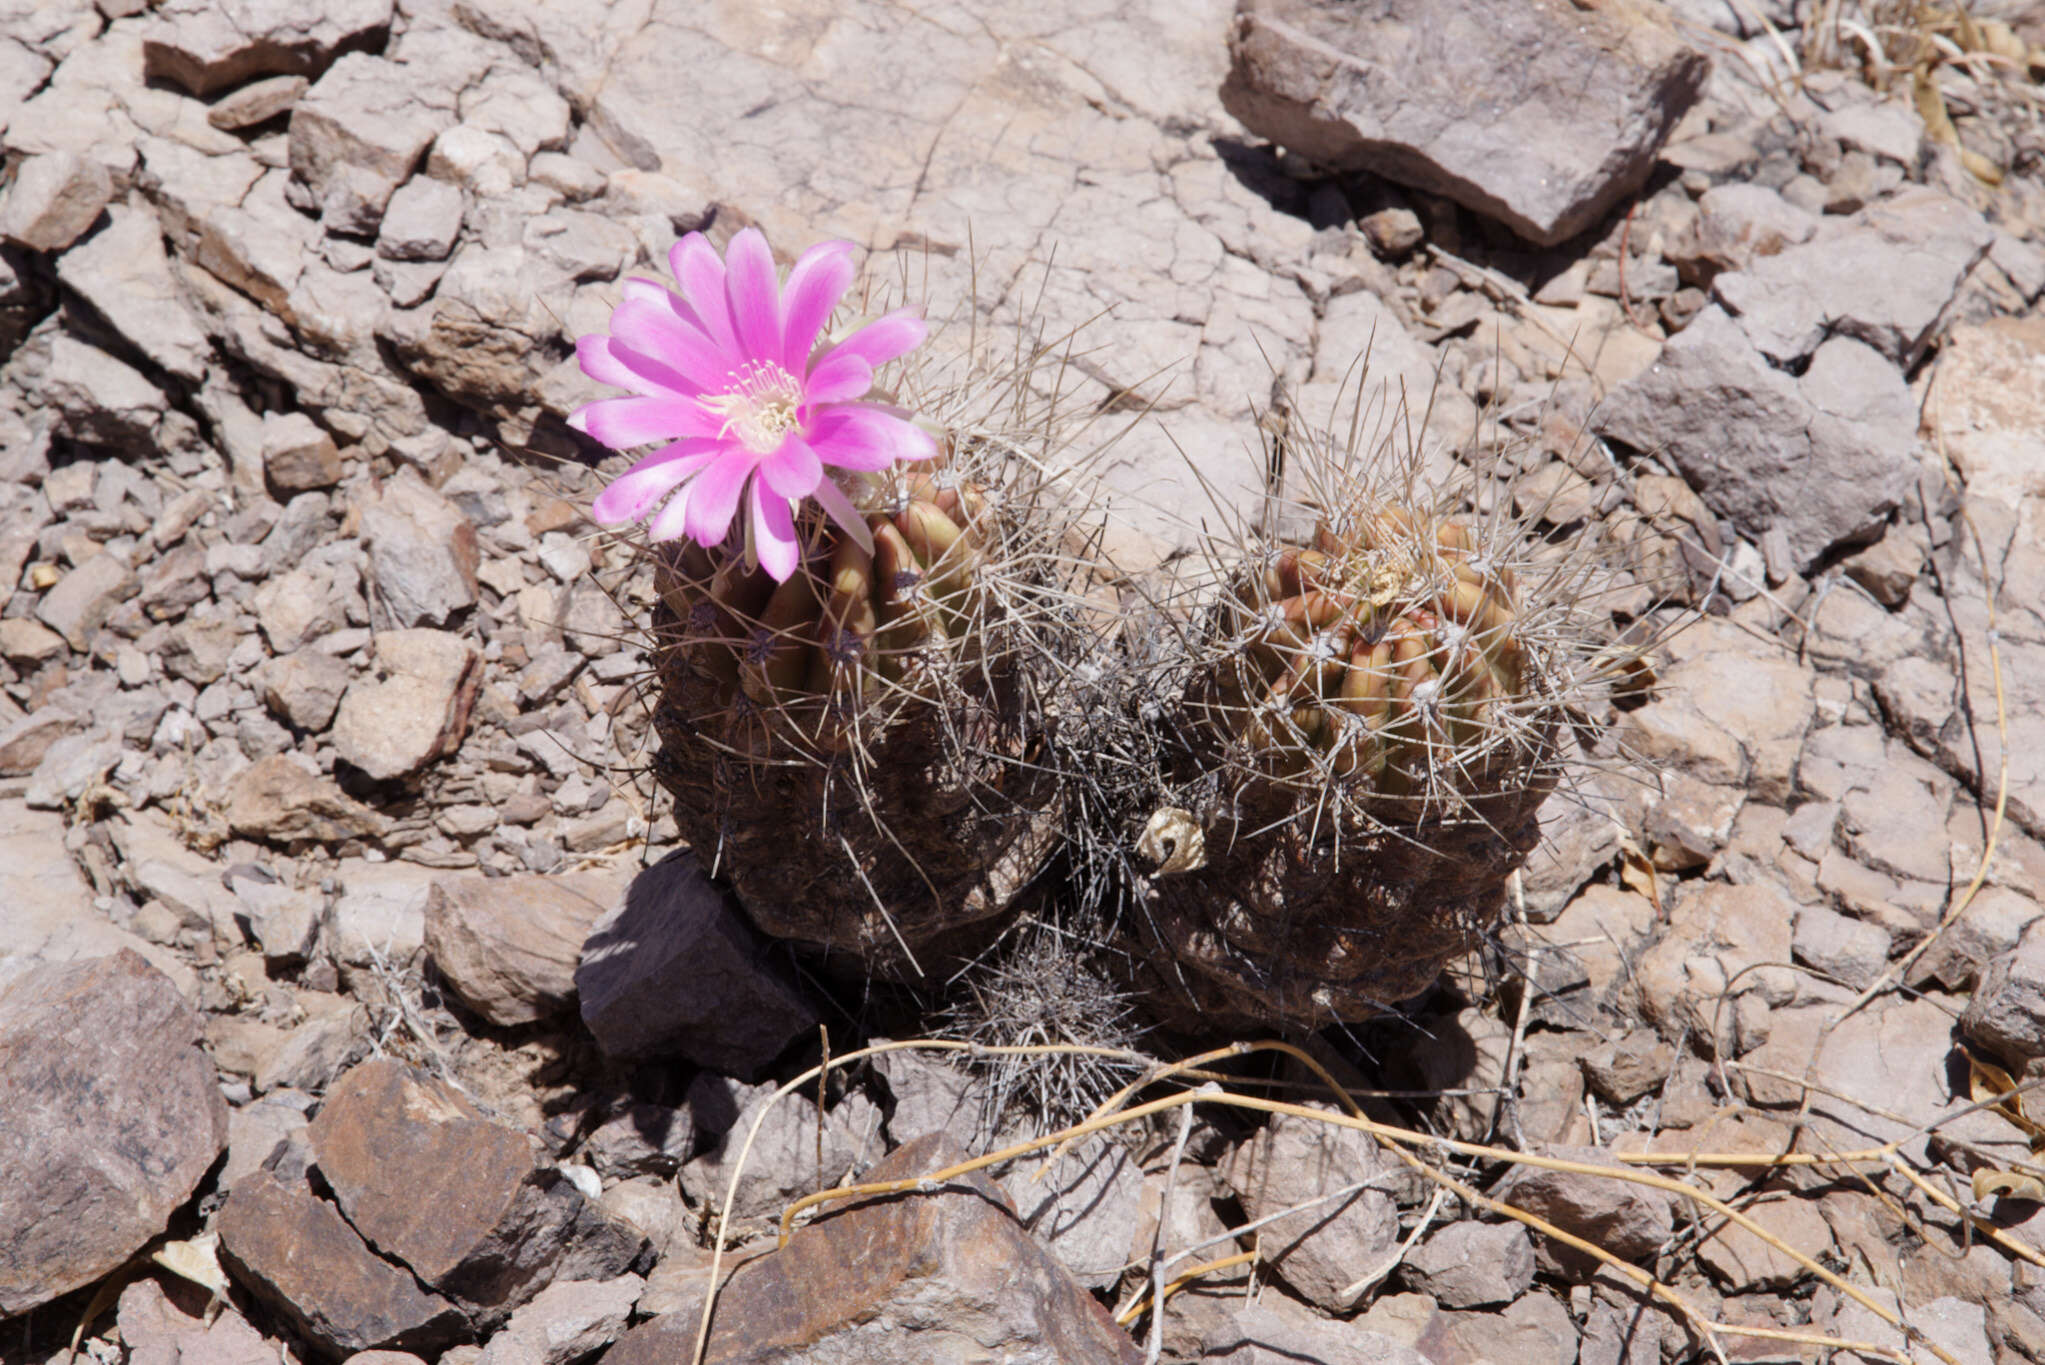 Image of Echinopsis caineana (Cárdenas) D. R. Hunt